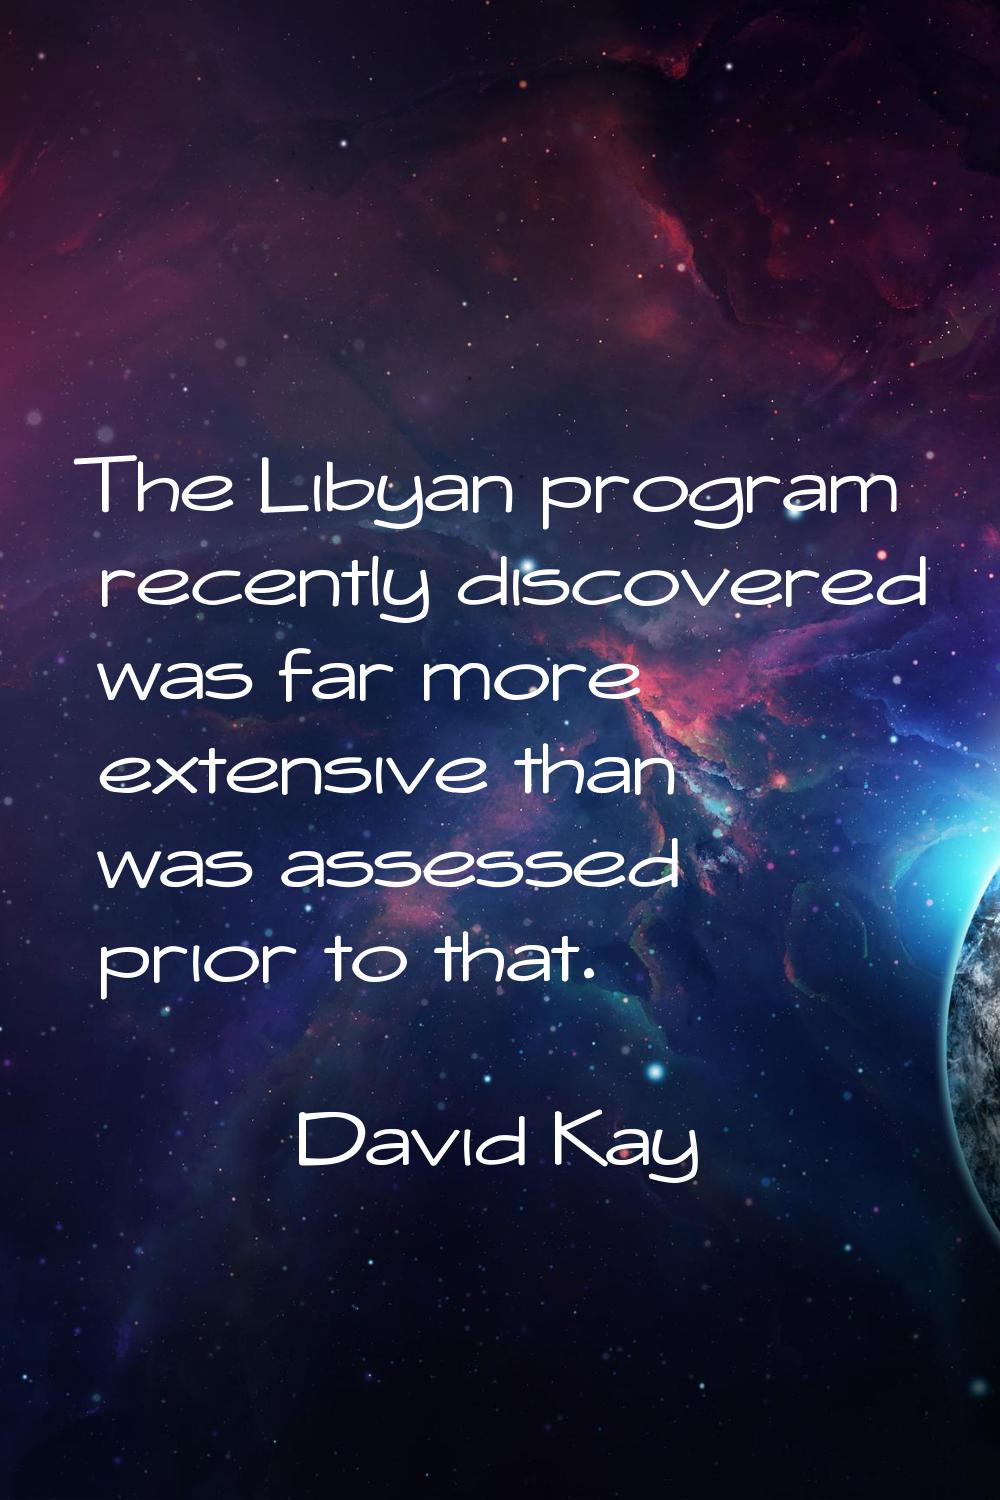 The Libyan program recently discovered was far more extensive than was assessed prior to that.